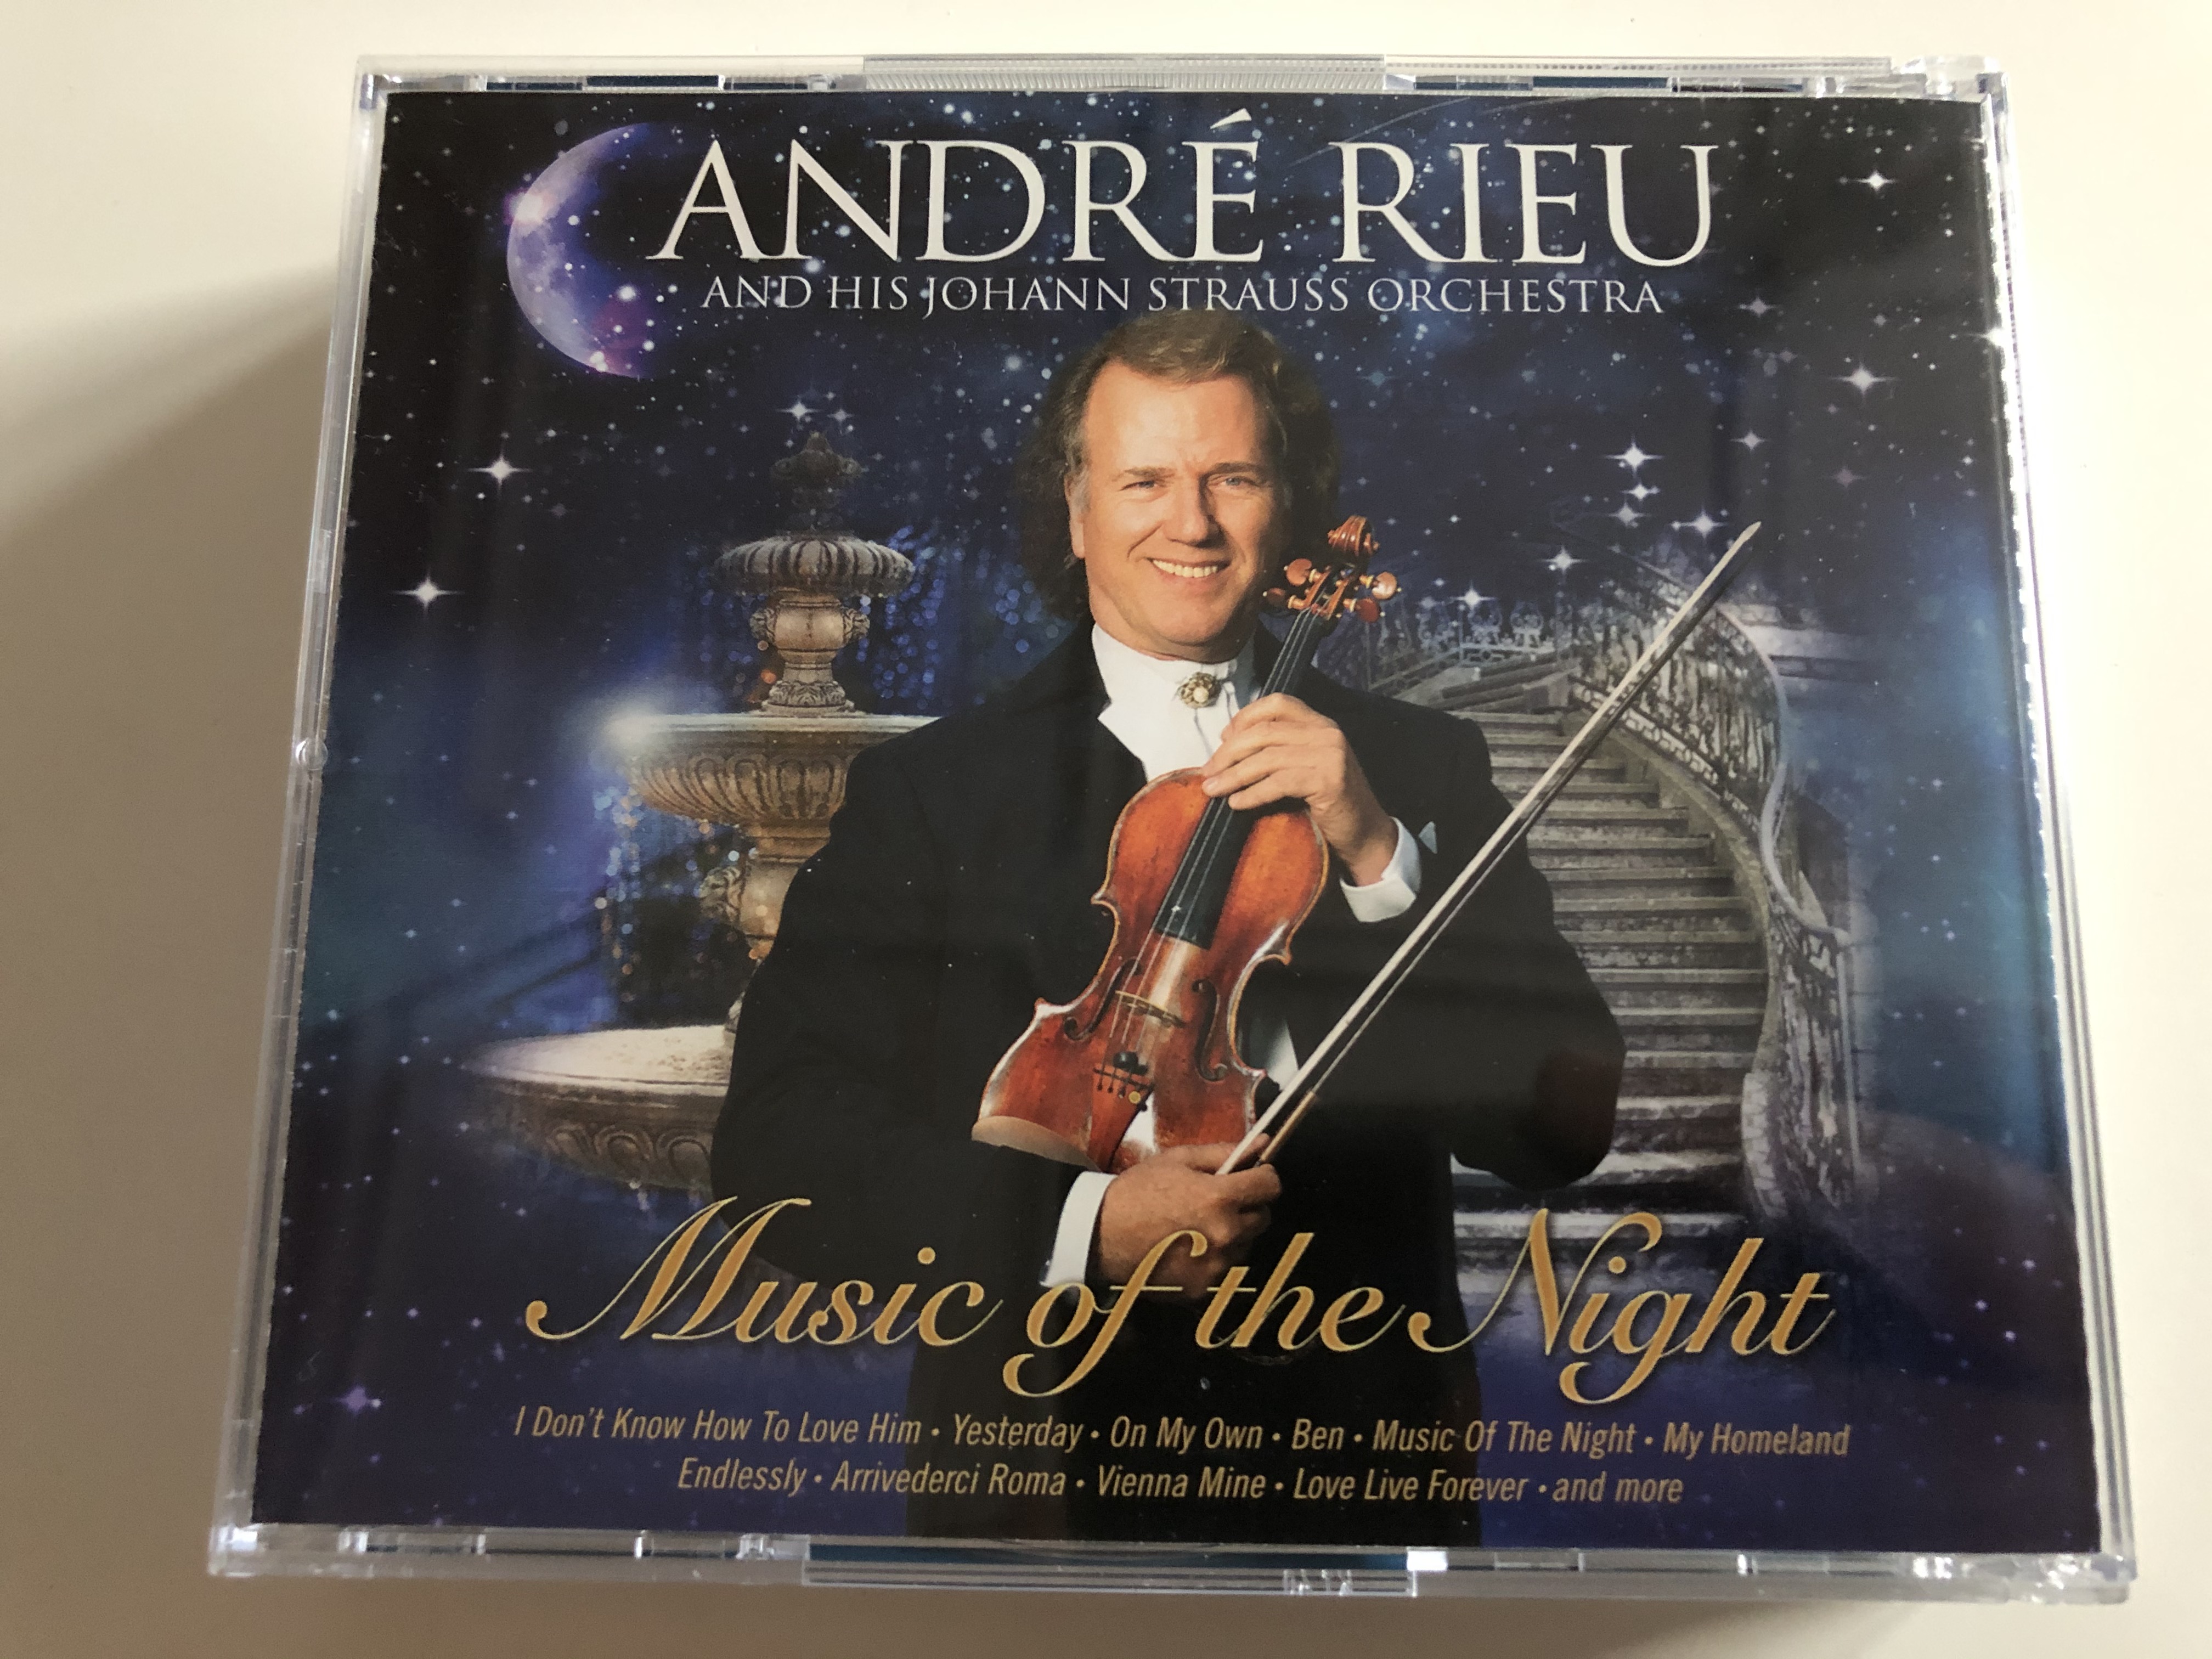 andr-rieu-celebrates-abba-music-of-the-night-chiquitita-waterloo-mamma-mia-dancing-queen-i-don-t-know-how-to-love-him-yesterday-on-my-own-ben-andre-rieu-productions-2x-audio-cd-20-6-.jpg